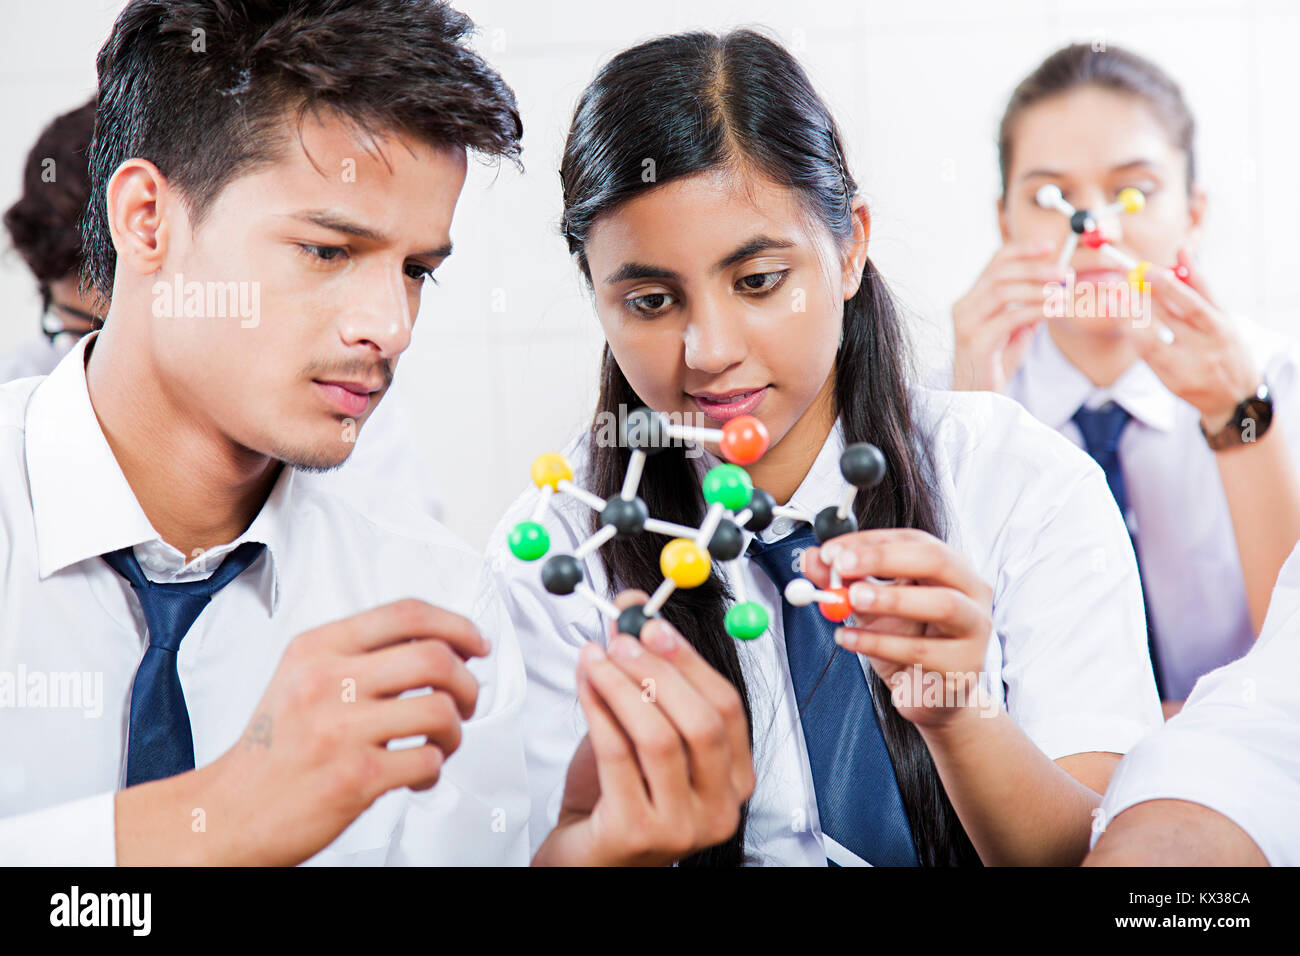 High school Science students studying plastic educational molecule model Together Stock Photo